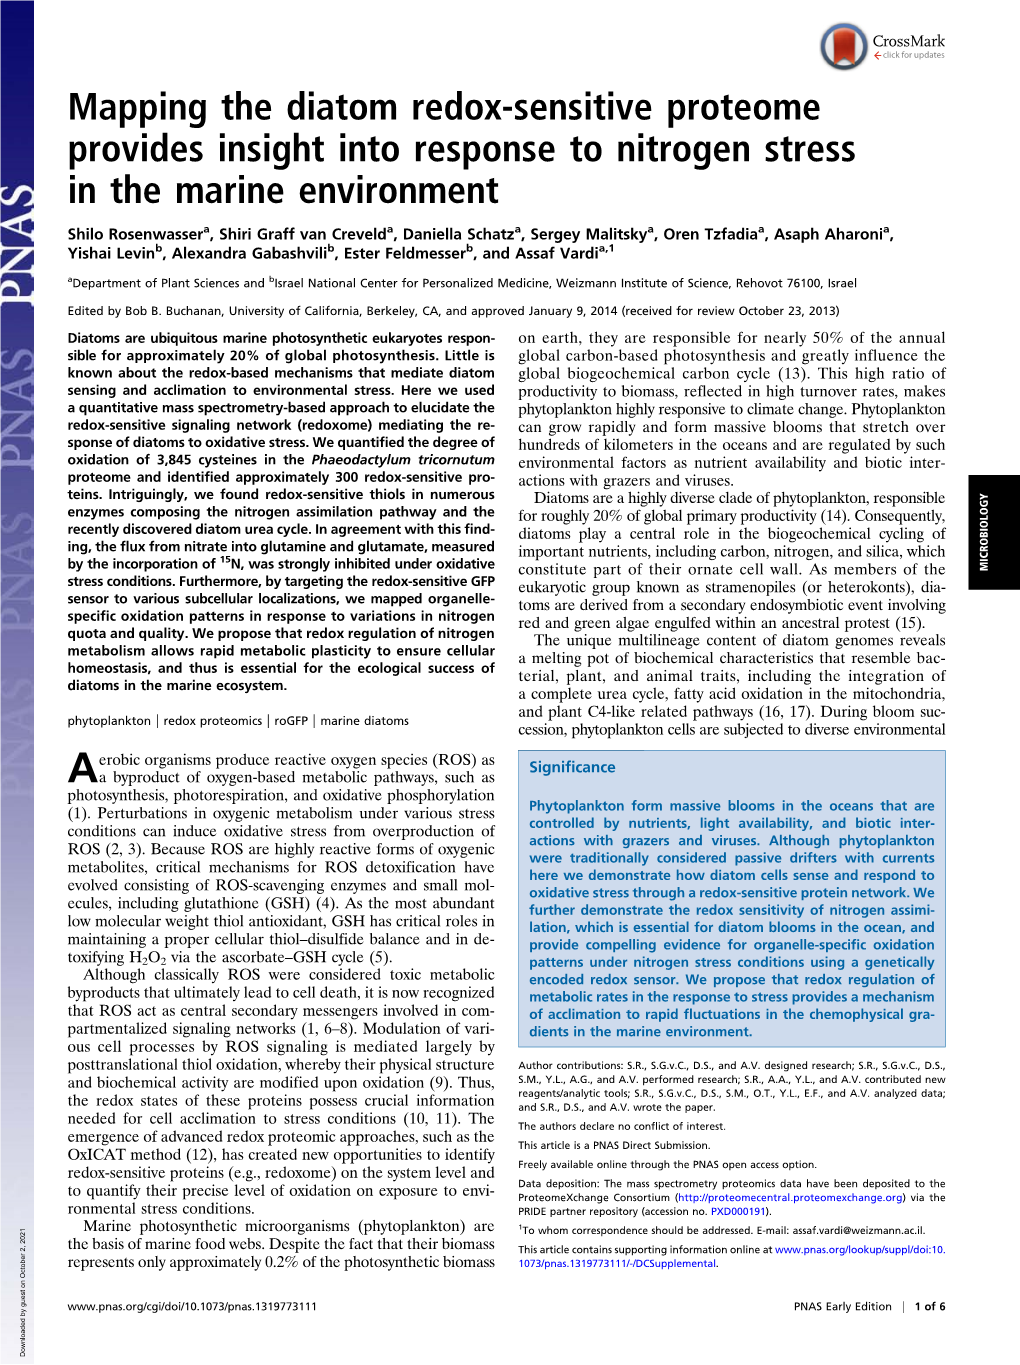 Mapping the Diatom Redox-Sensitive Proteome Provides Insight Into Response to Nitrogen Stress in the Marine Environment